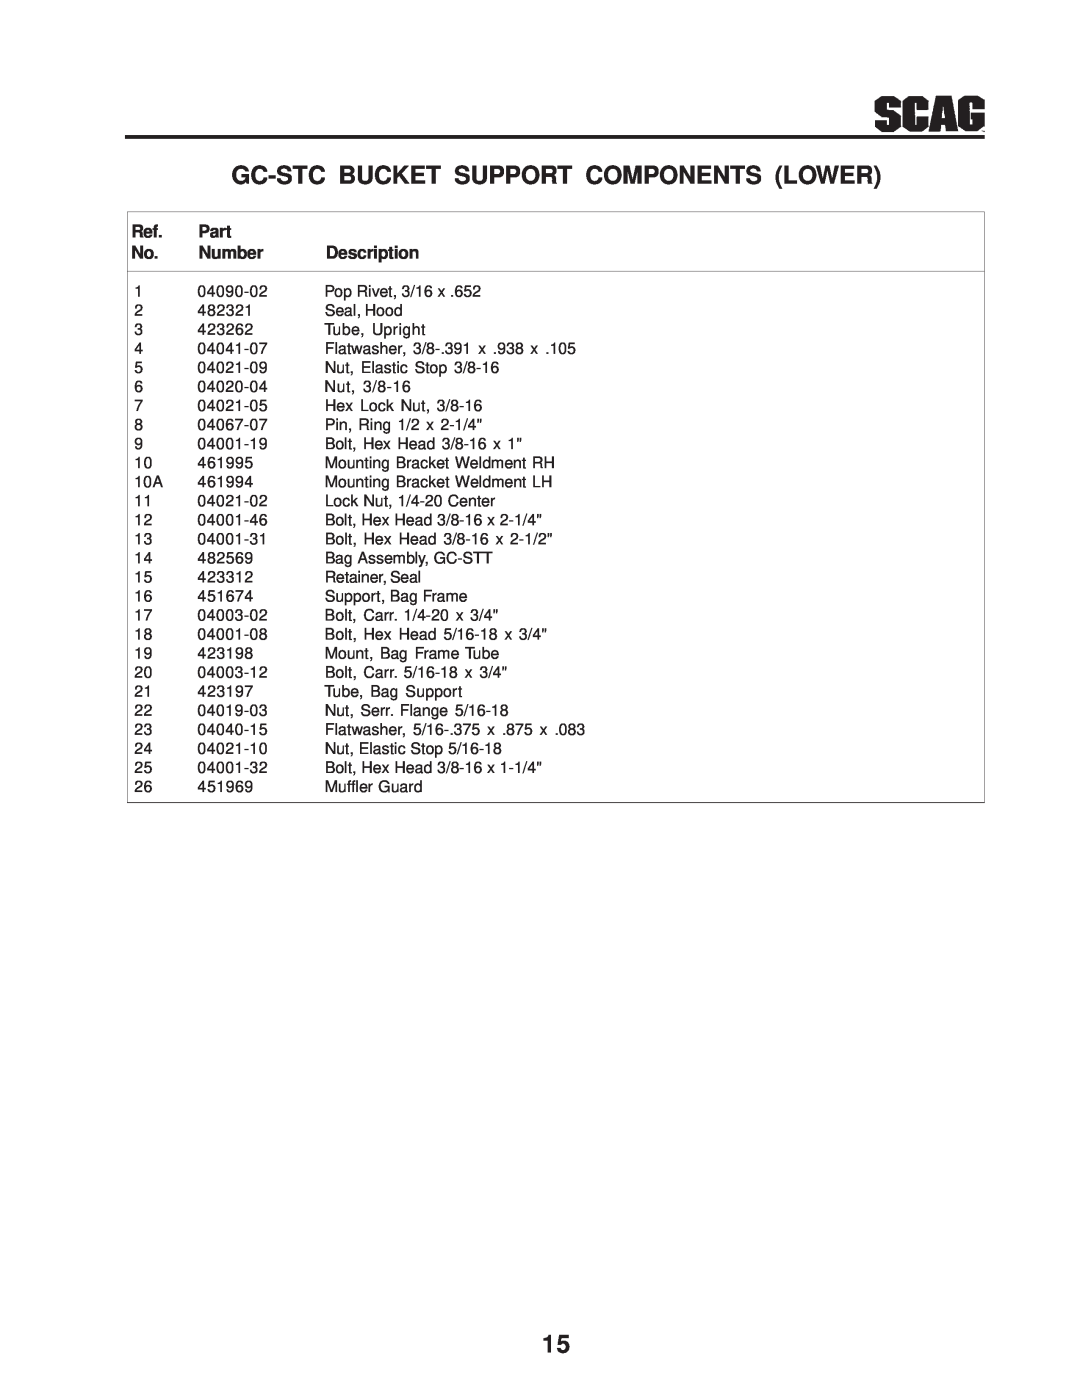 Scag Power Equipment GC-STC-V operating instructions Gc-Stc Bucket Support Components Lower, Part, Number, Description 